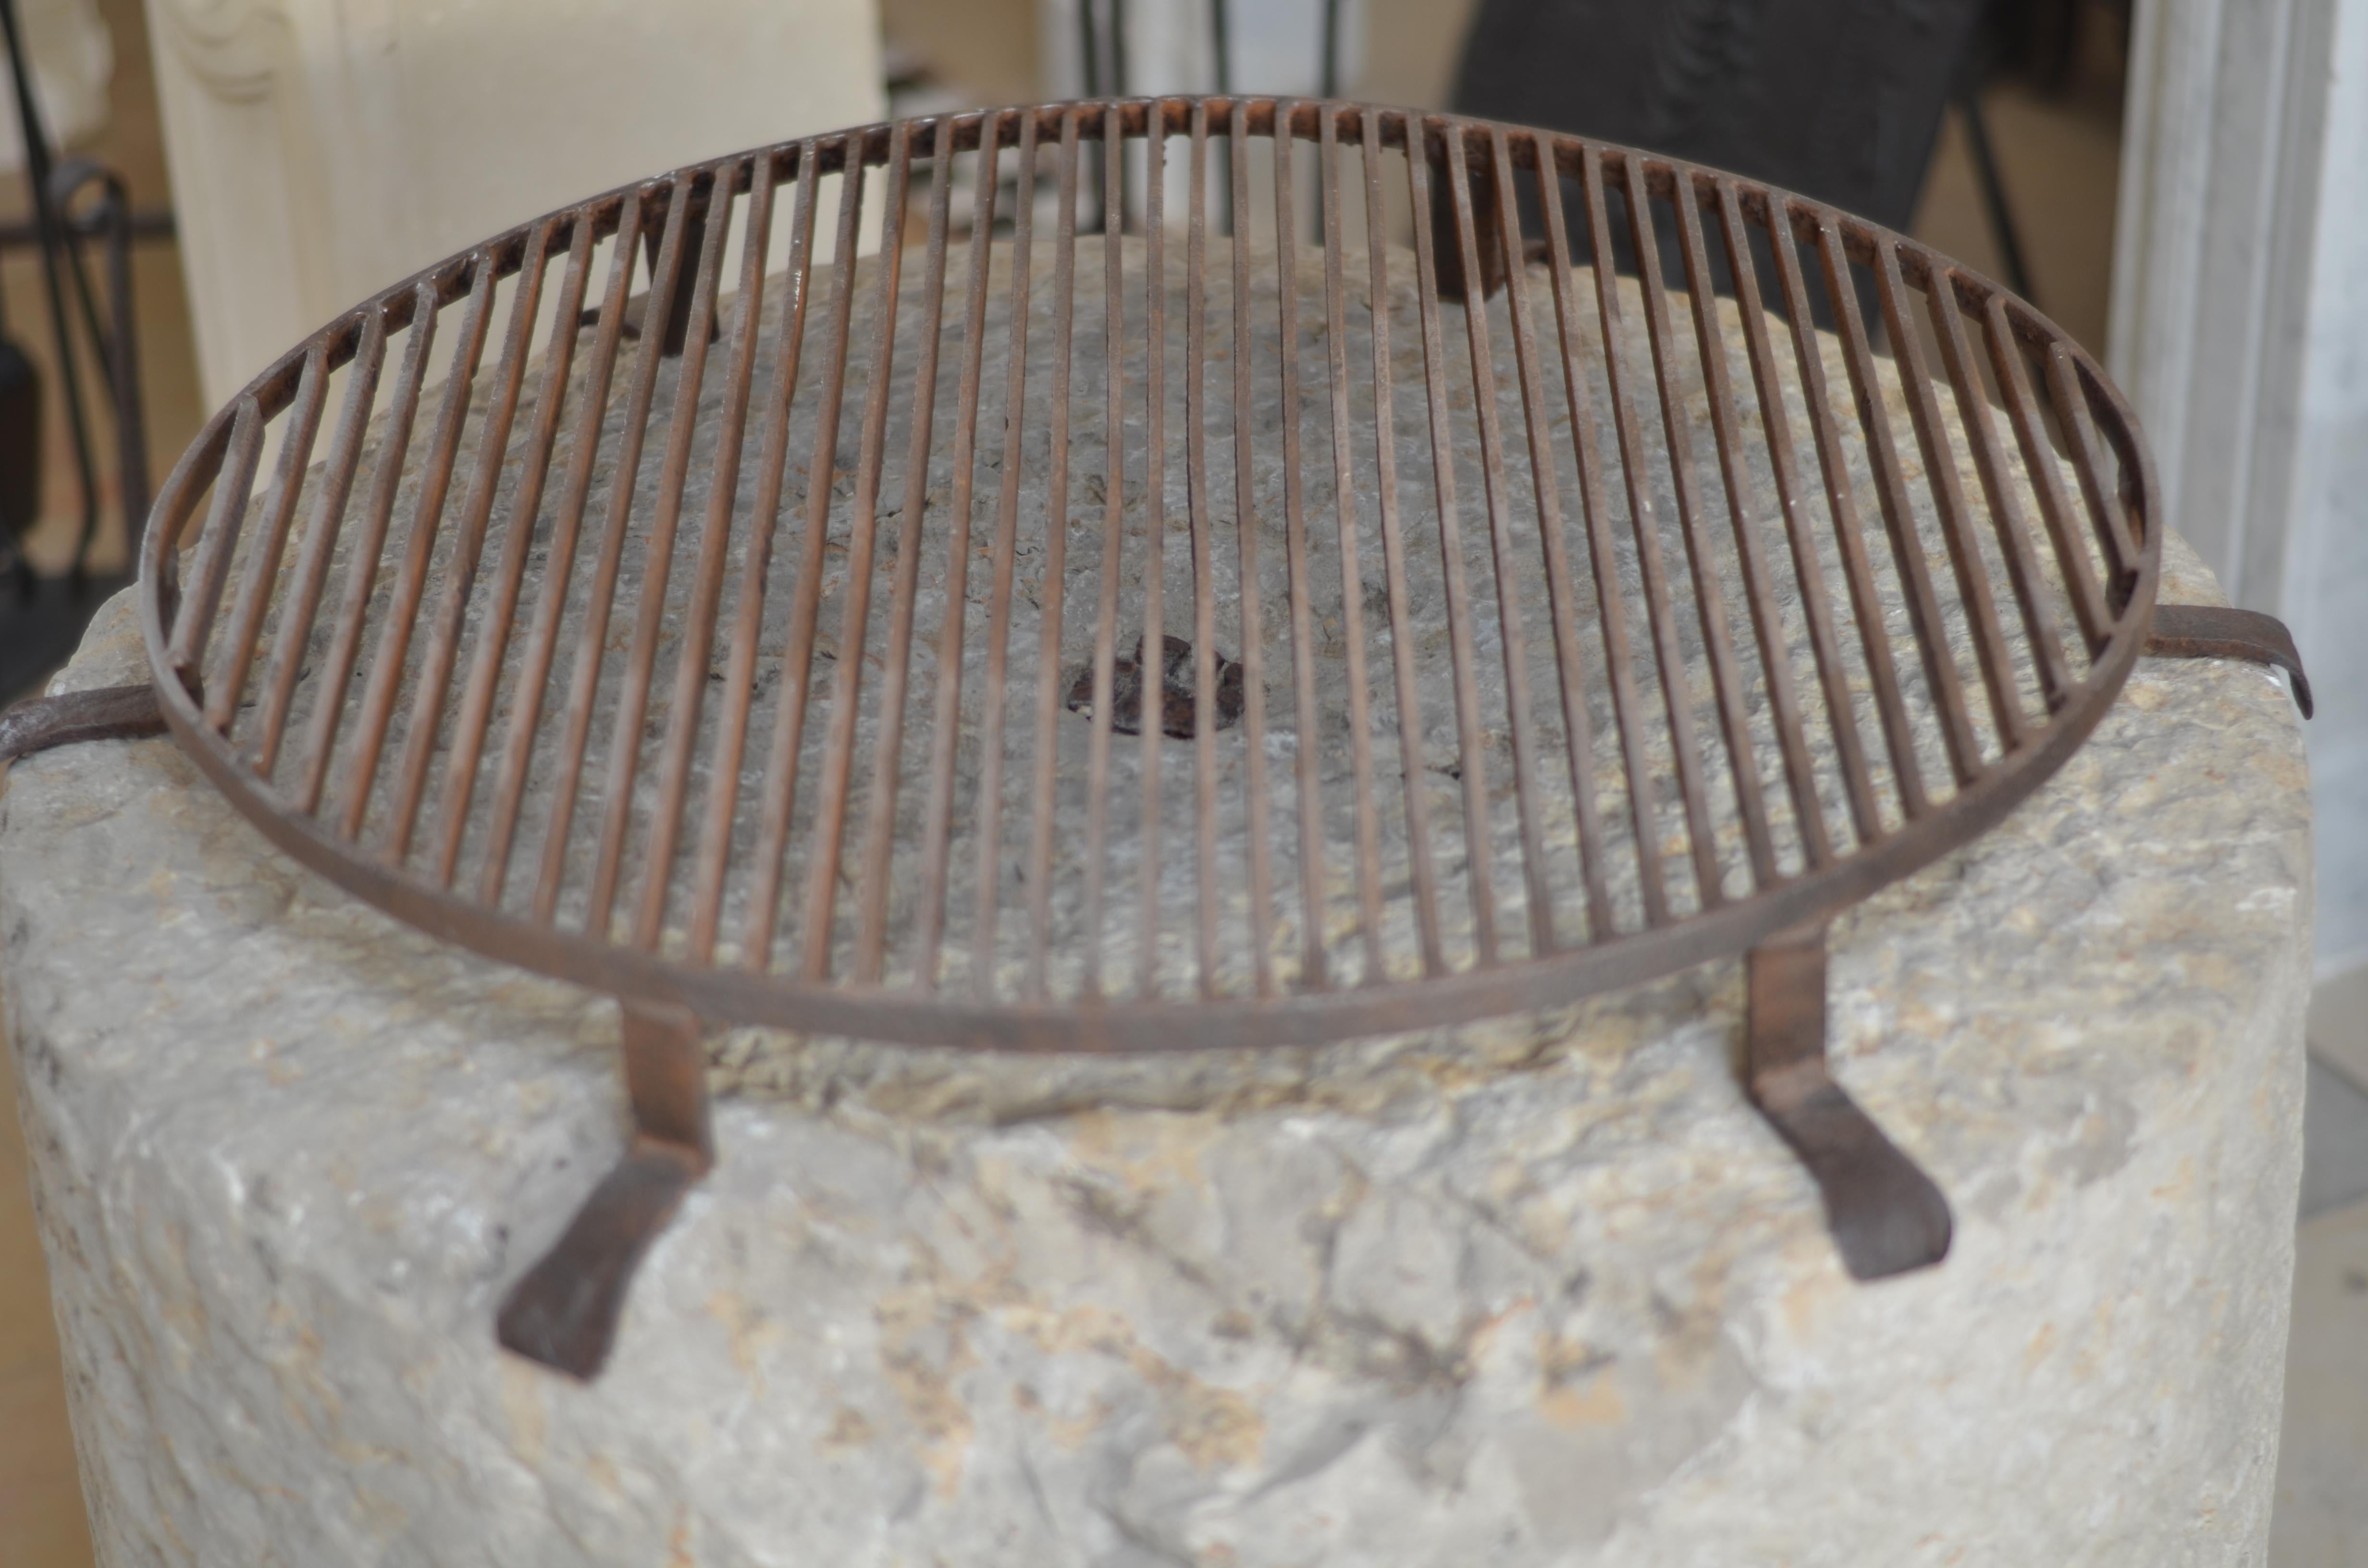 Fire Rock / Barbecue / Grill For Sale 1